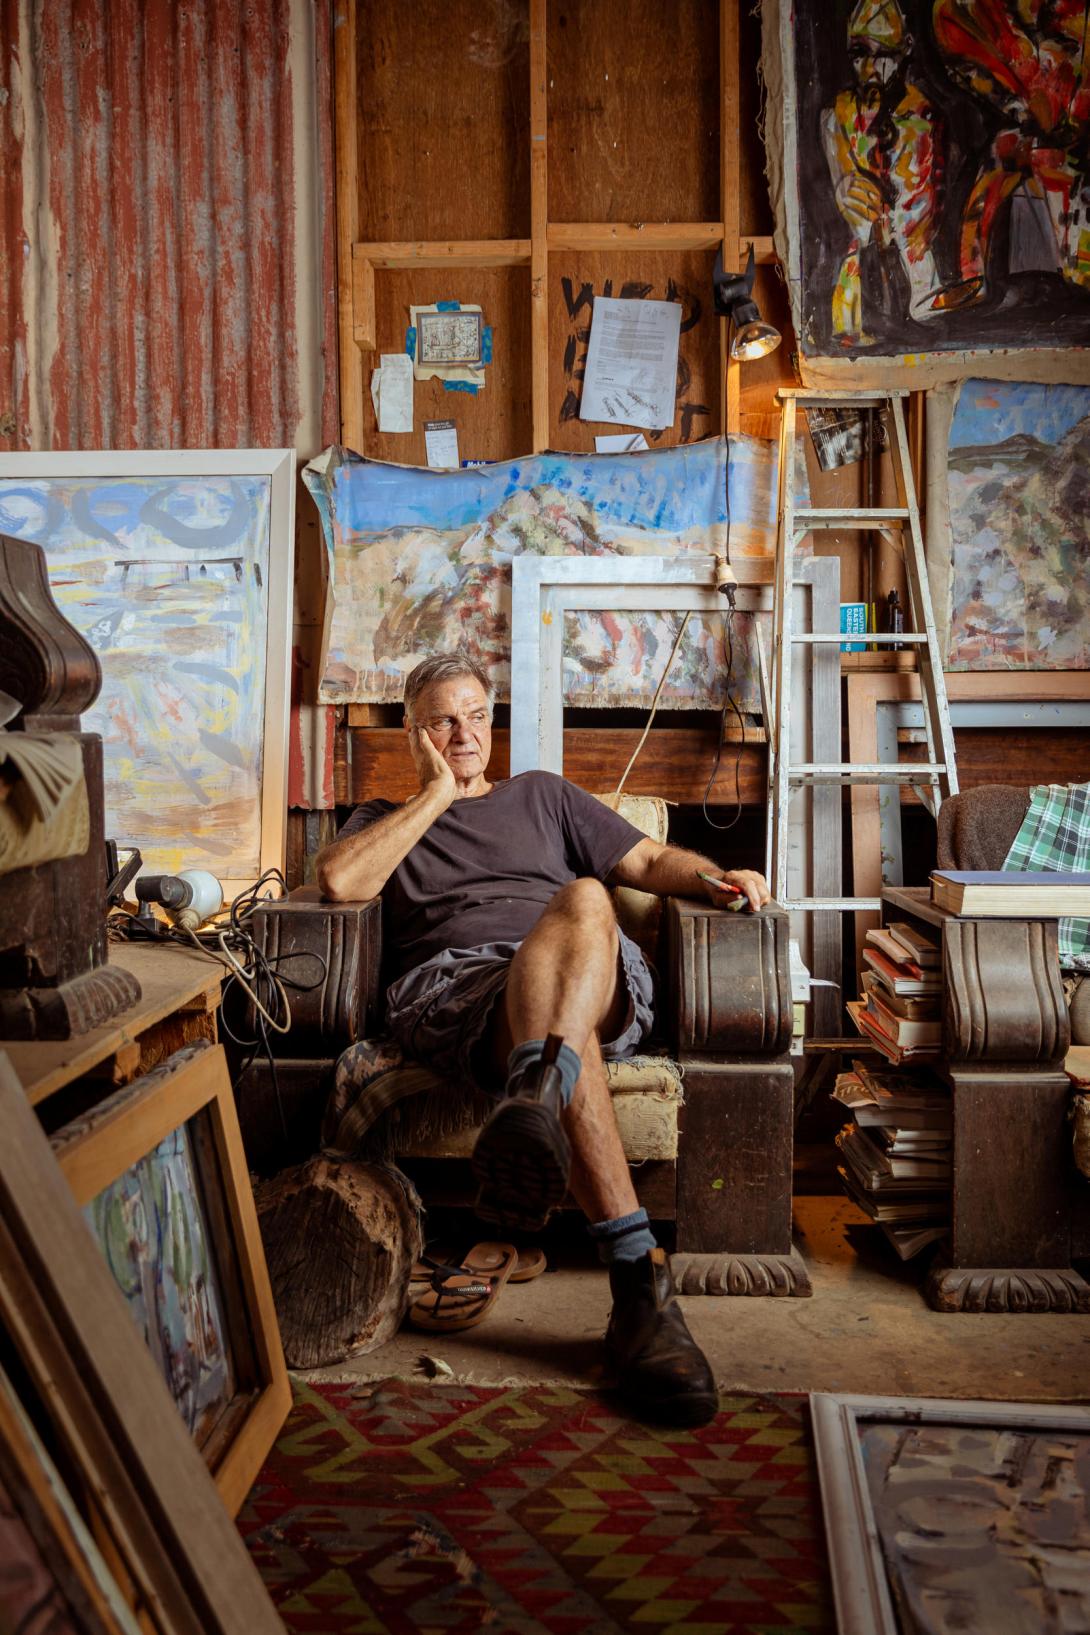 A photograph depicting an artist; sits in a chair surveying his shed-studio, which is largely outside of the frame of the photograph. He is surrounded by works-in-progress, materials and tools.